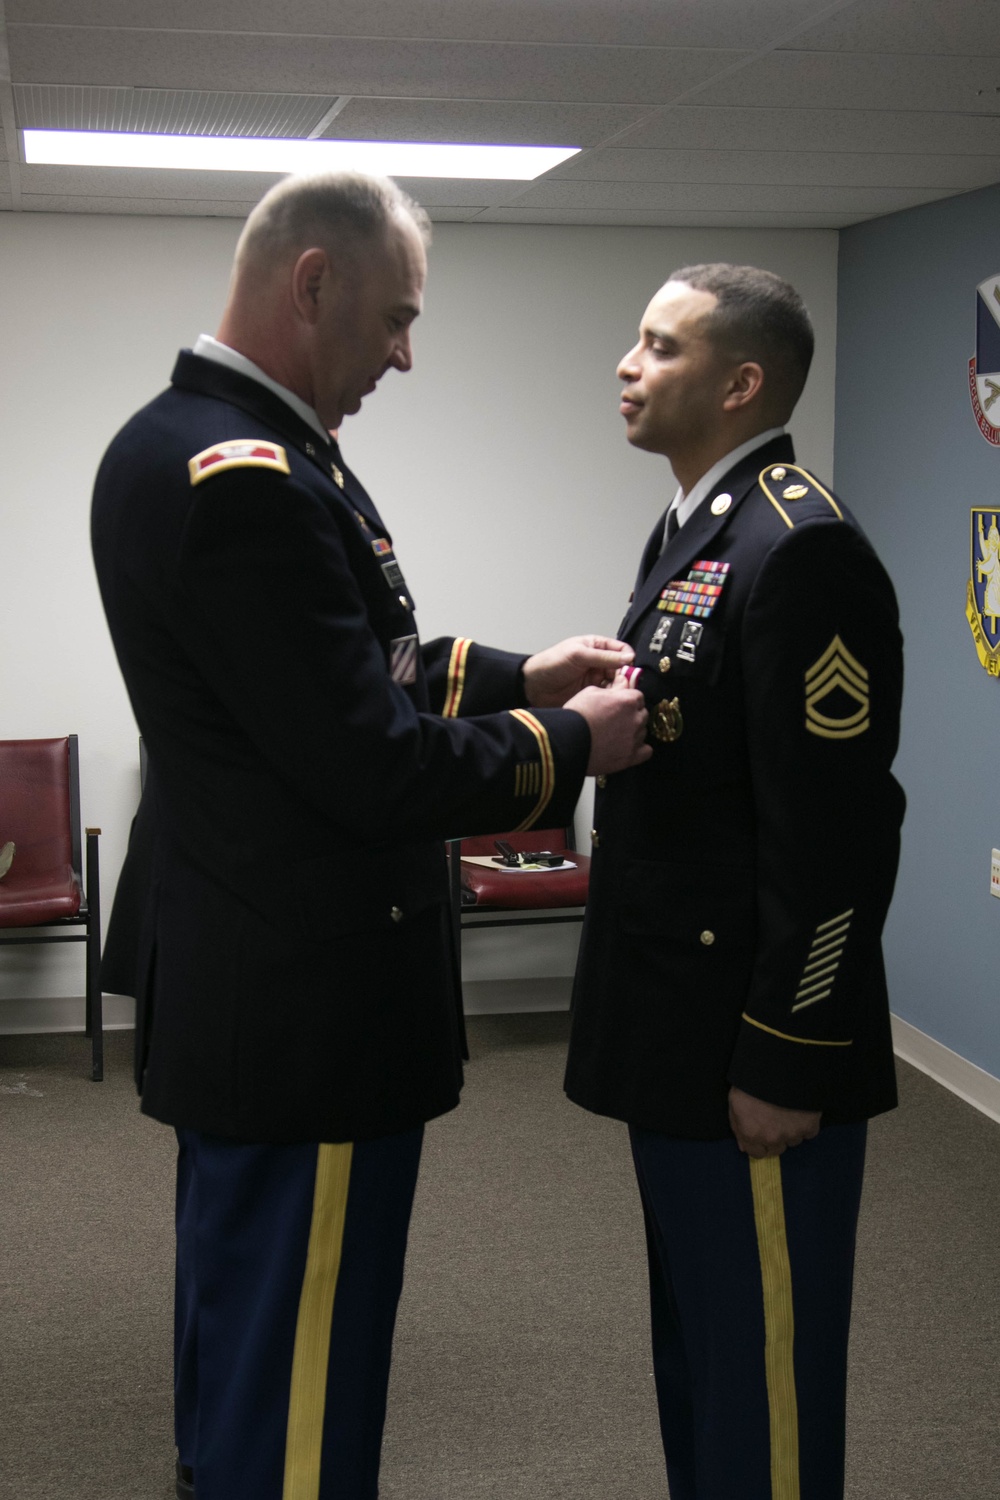 Meritorious Service Medal presented to 181st Soldier